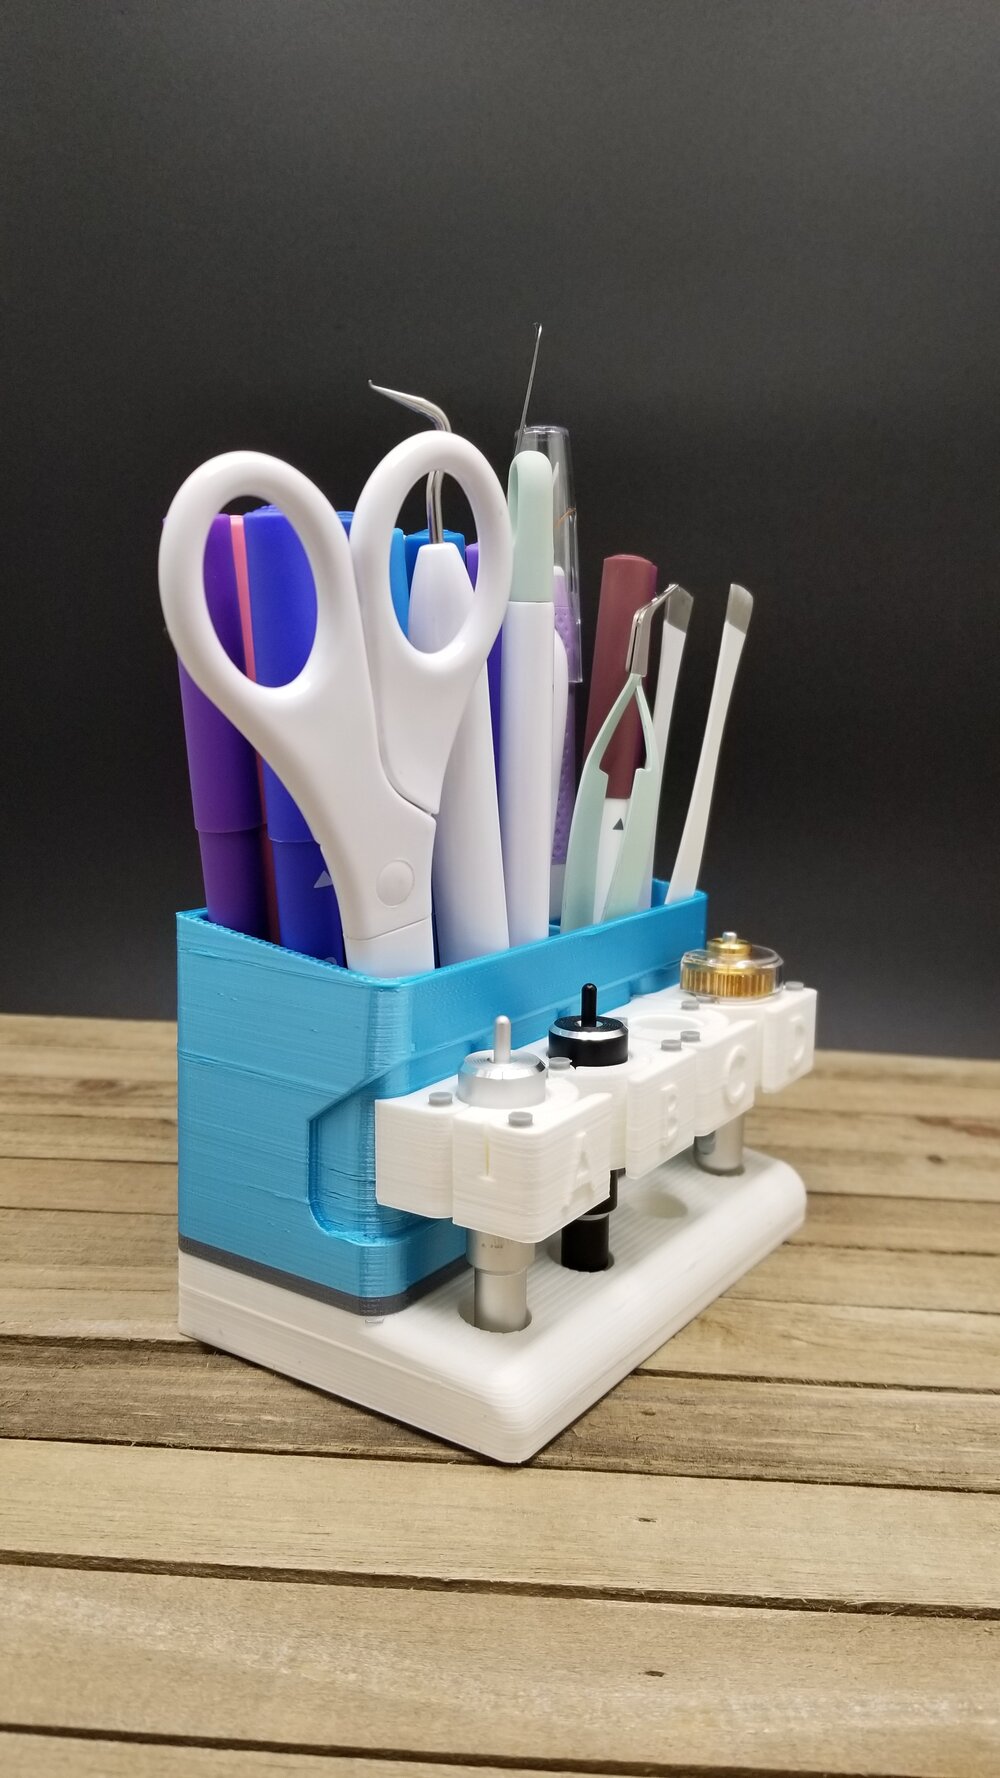 Cameo 4 Mini Caddy / Mini Cami 4 Caddy™ Tool Organizer for Silhouette Cameo  4 Tool Kit, Accessories and More 